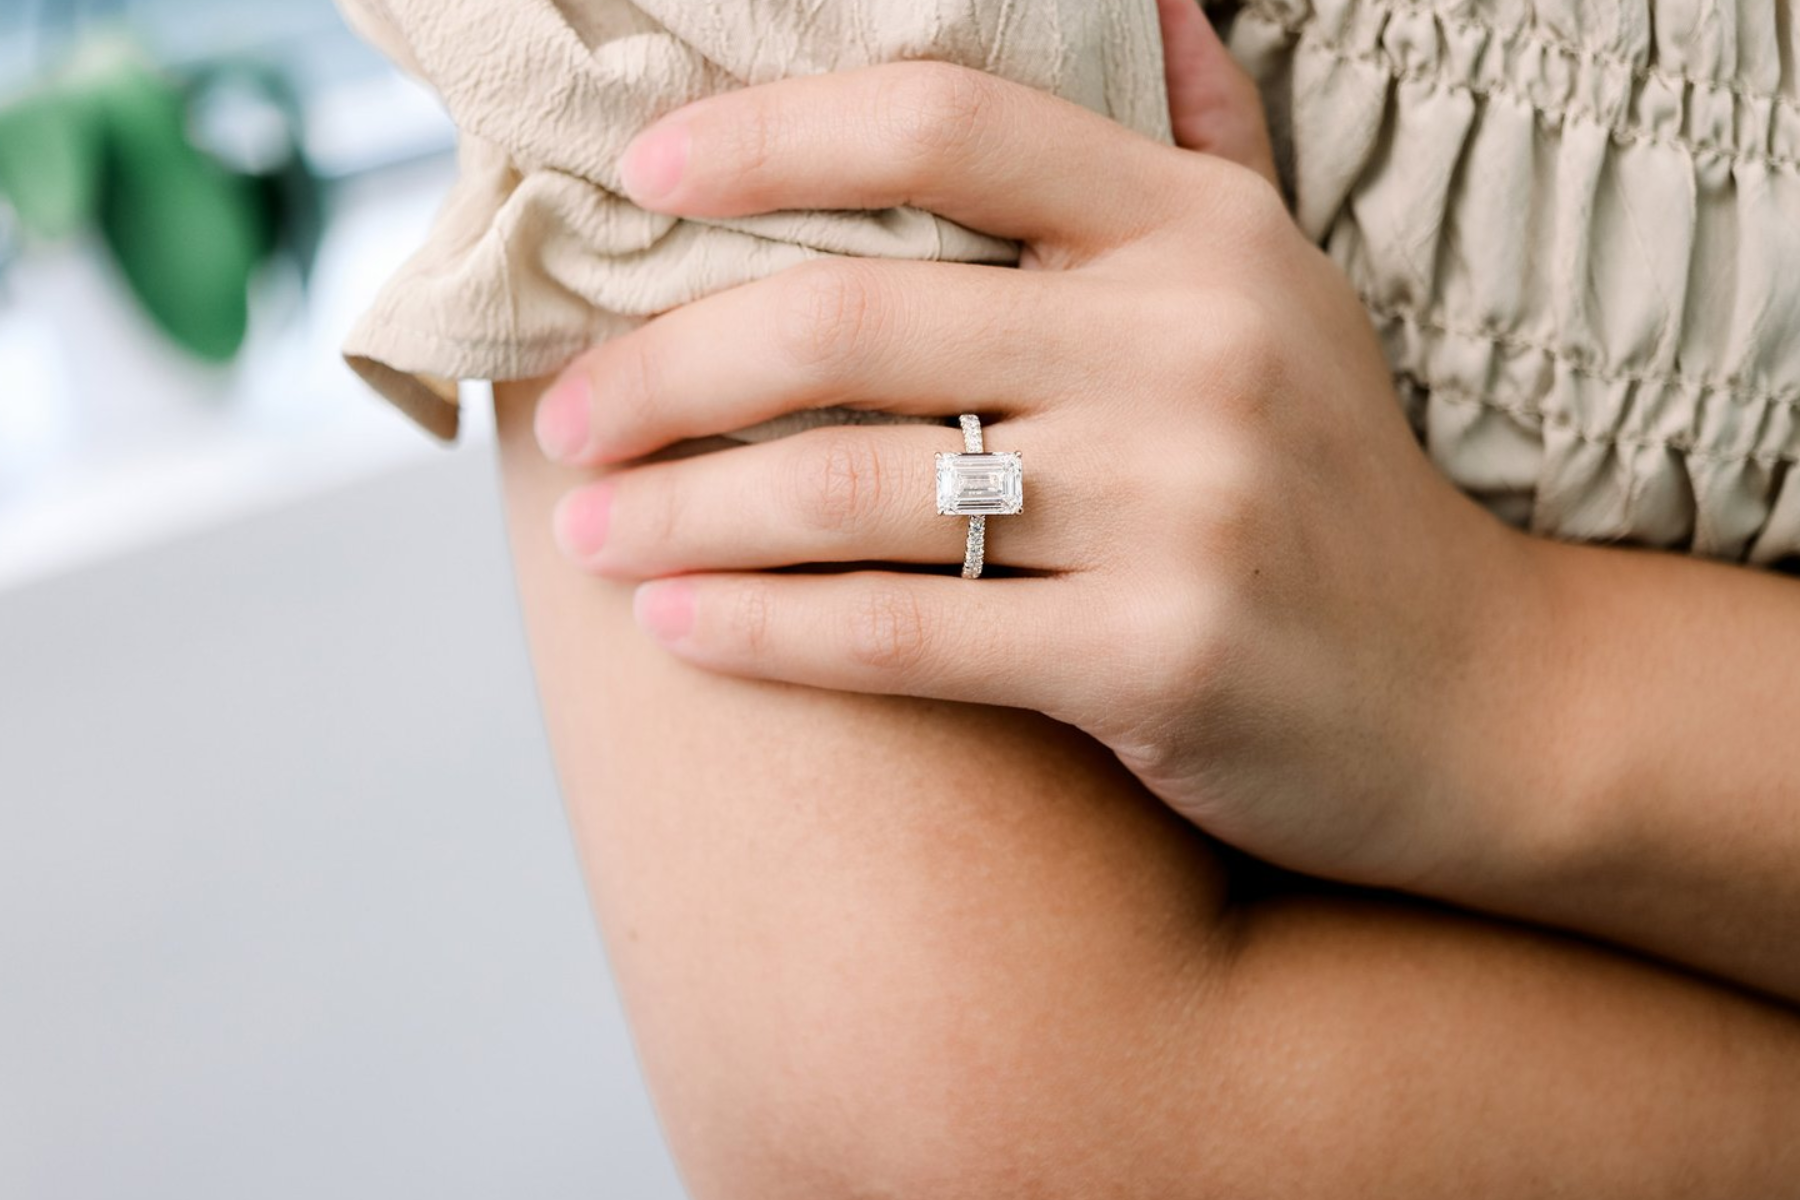 Emerald-cut diamond engagement ring on the hand of a woman posing for a half-body shot